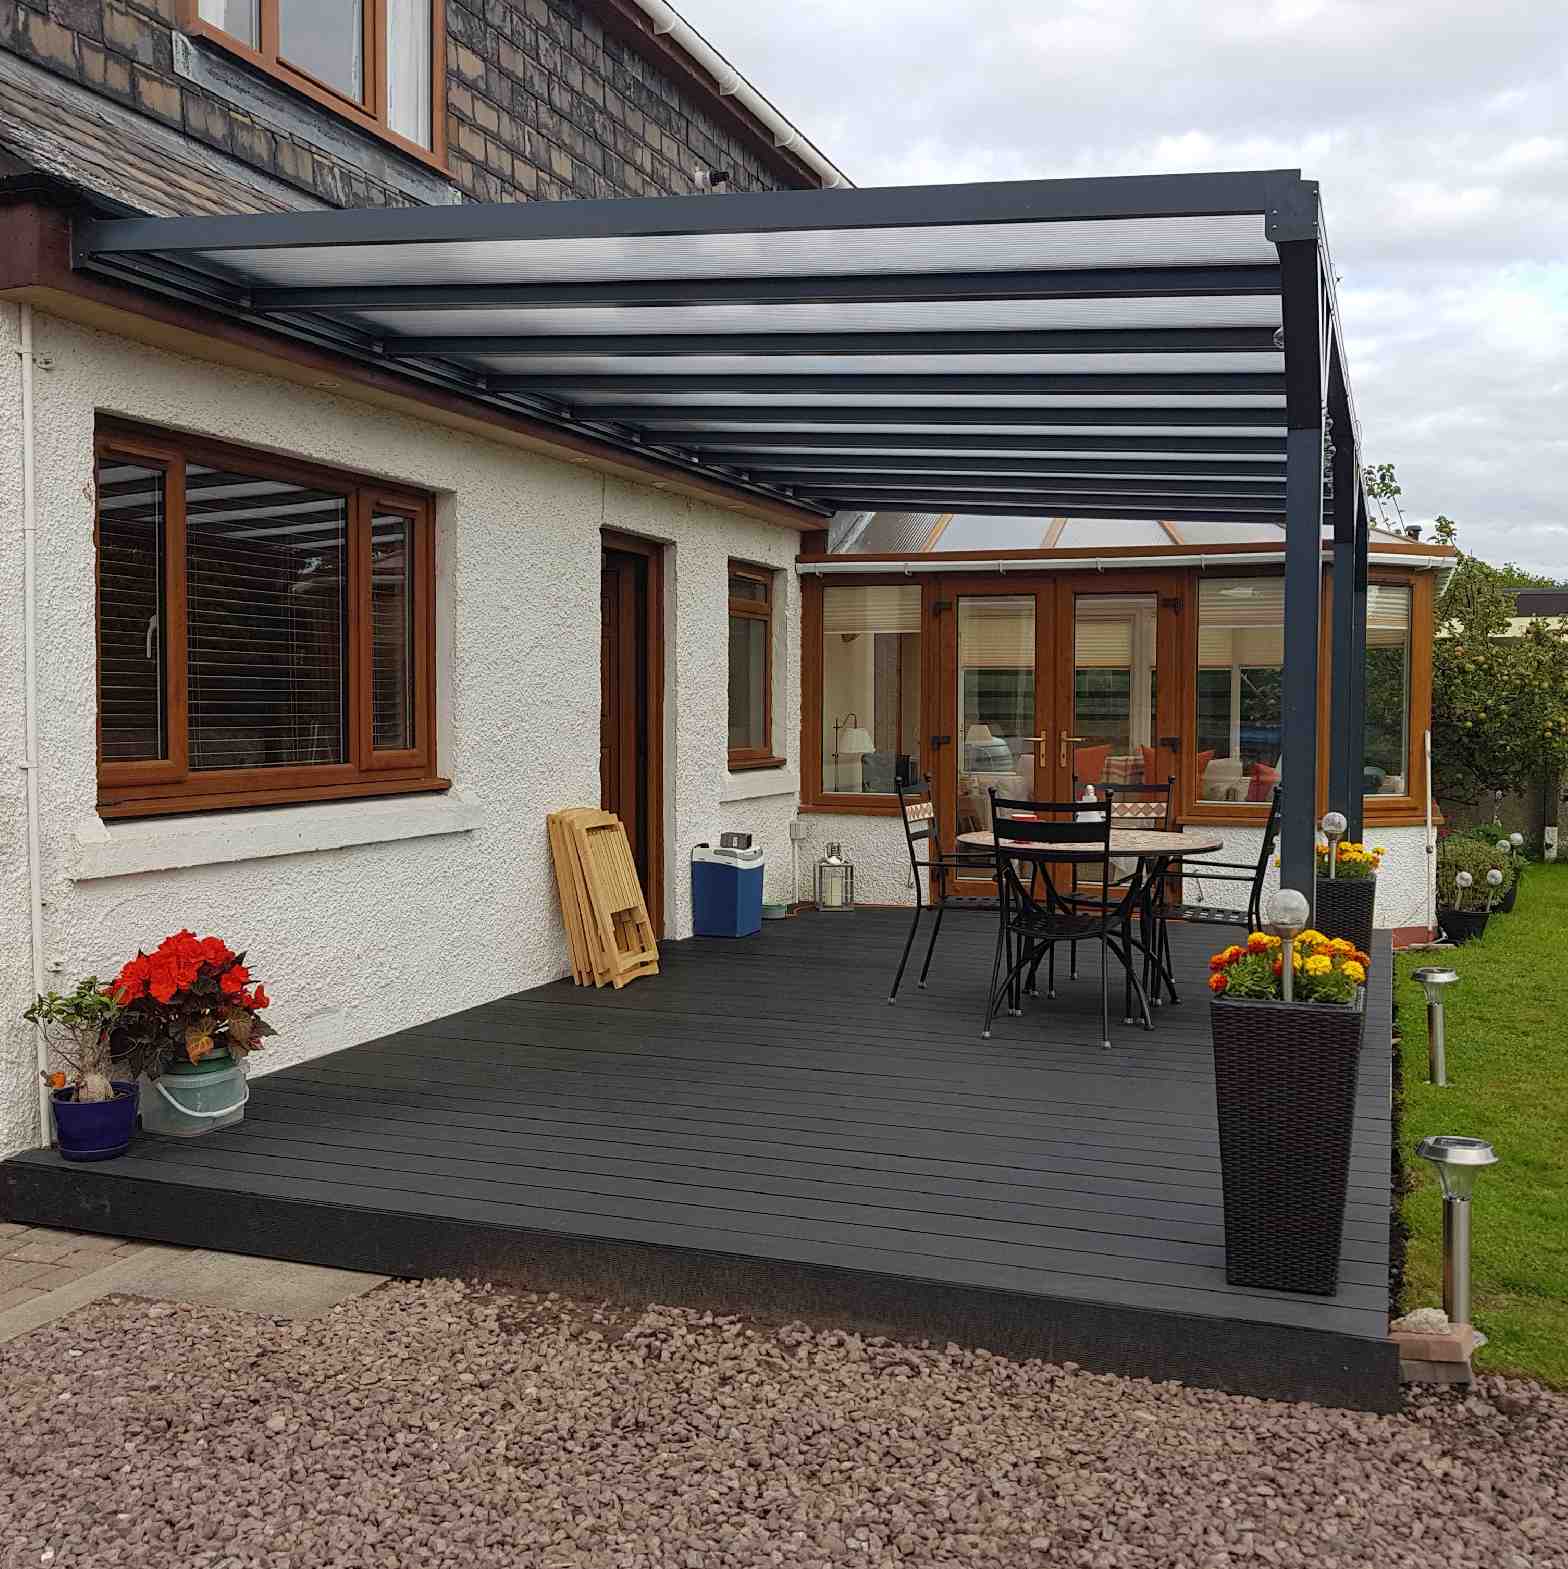 Buy Omega Verandah, Anthracite Grey, 16mm Polycarbonate Glazing - 12.0m (W) x 4.0m (P), (5) Supporting Posts online today